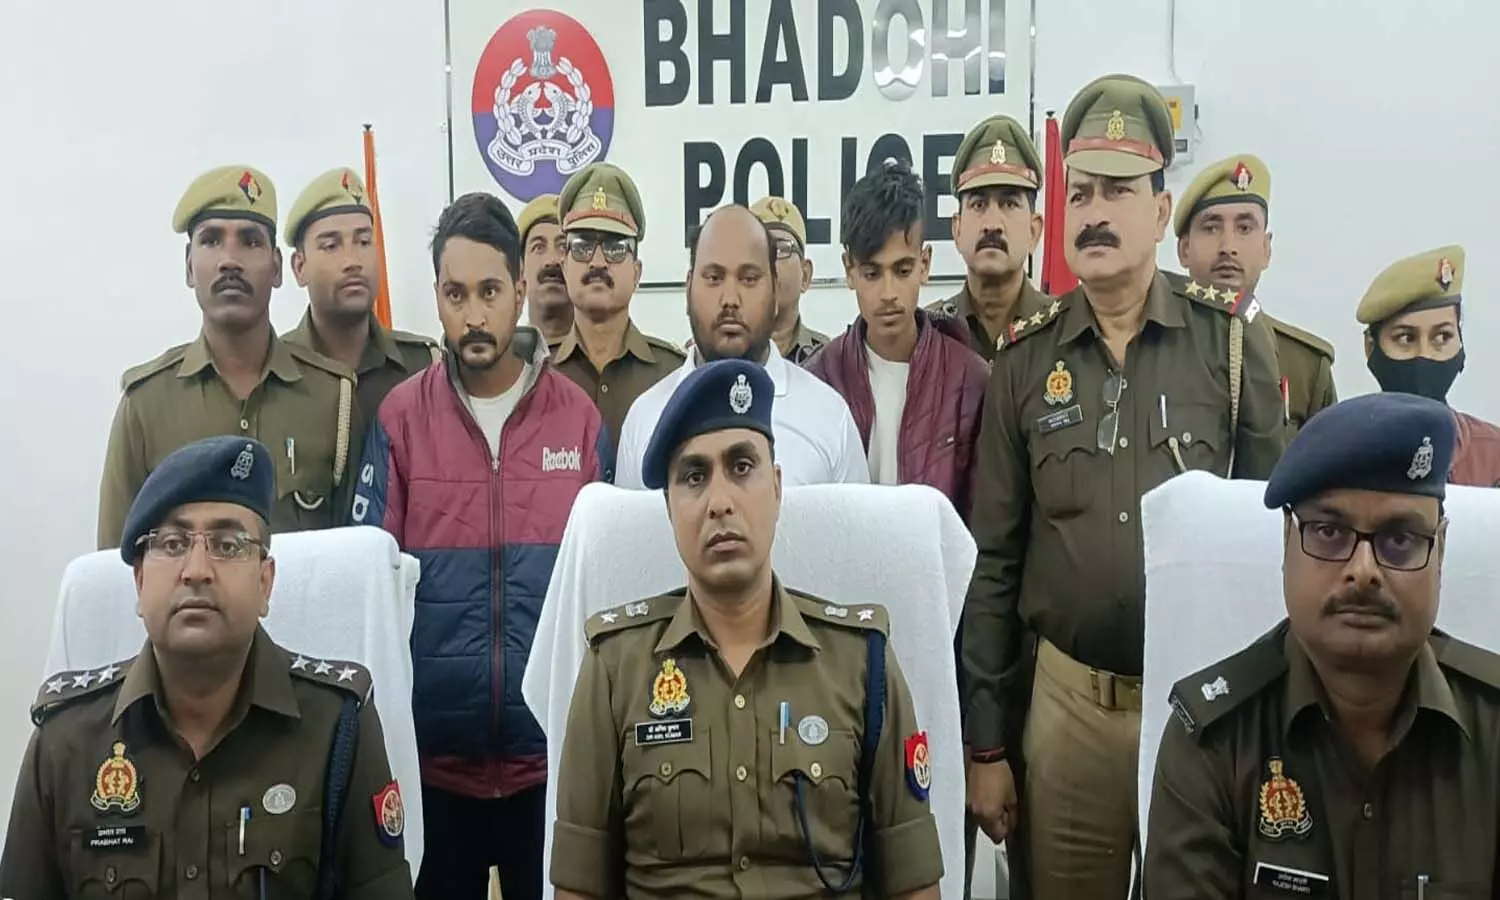 Interstate ATM fraud gang busted by police in Bhadohi, 3 arrested